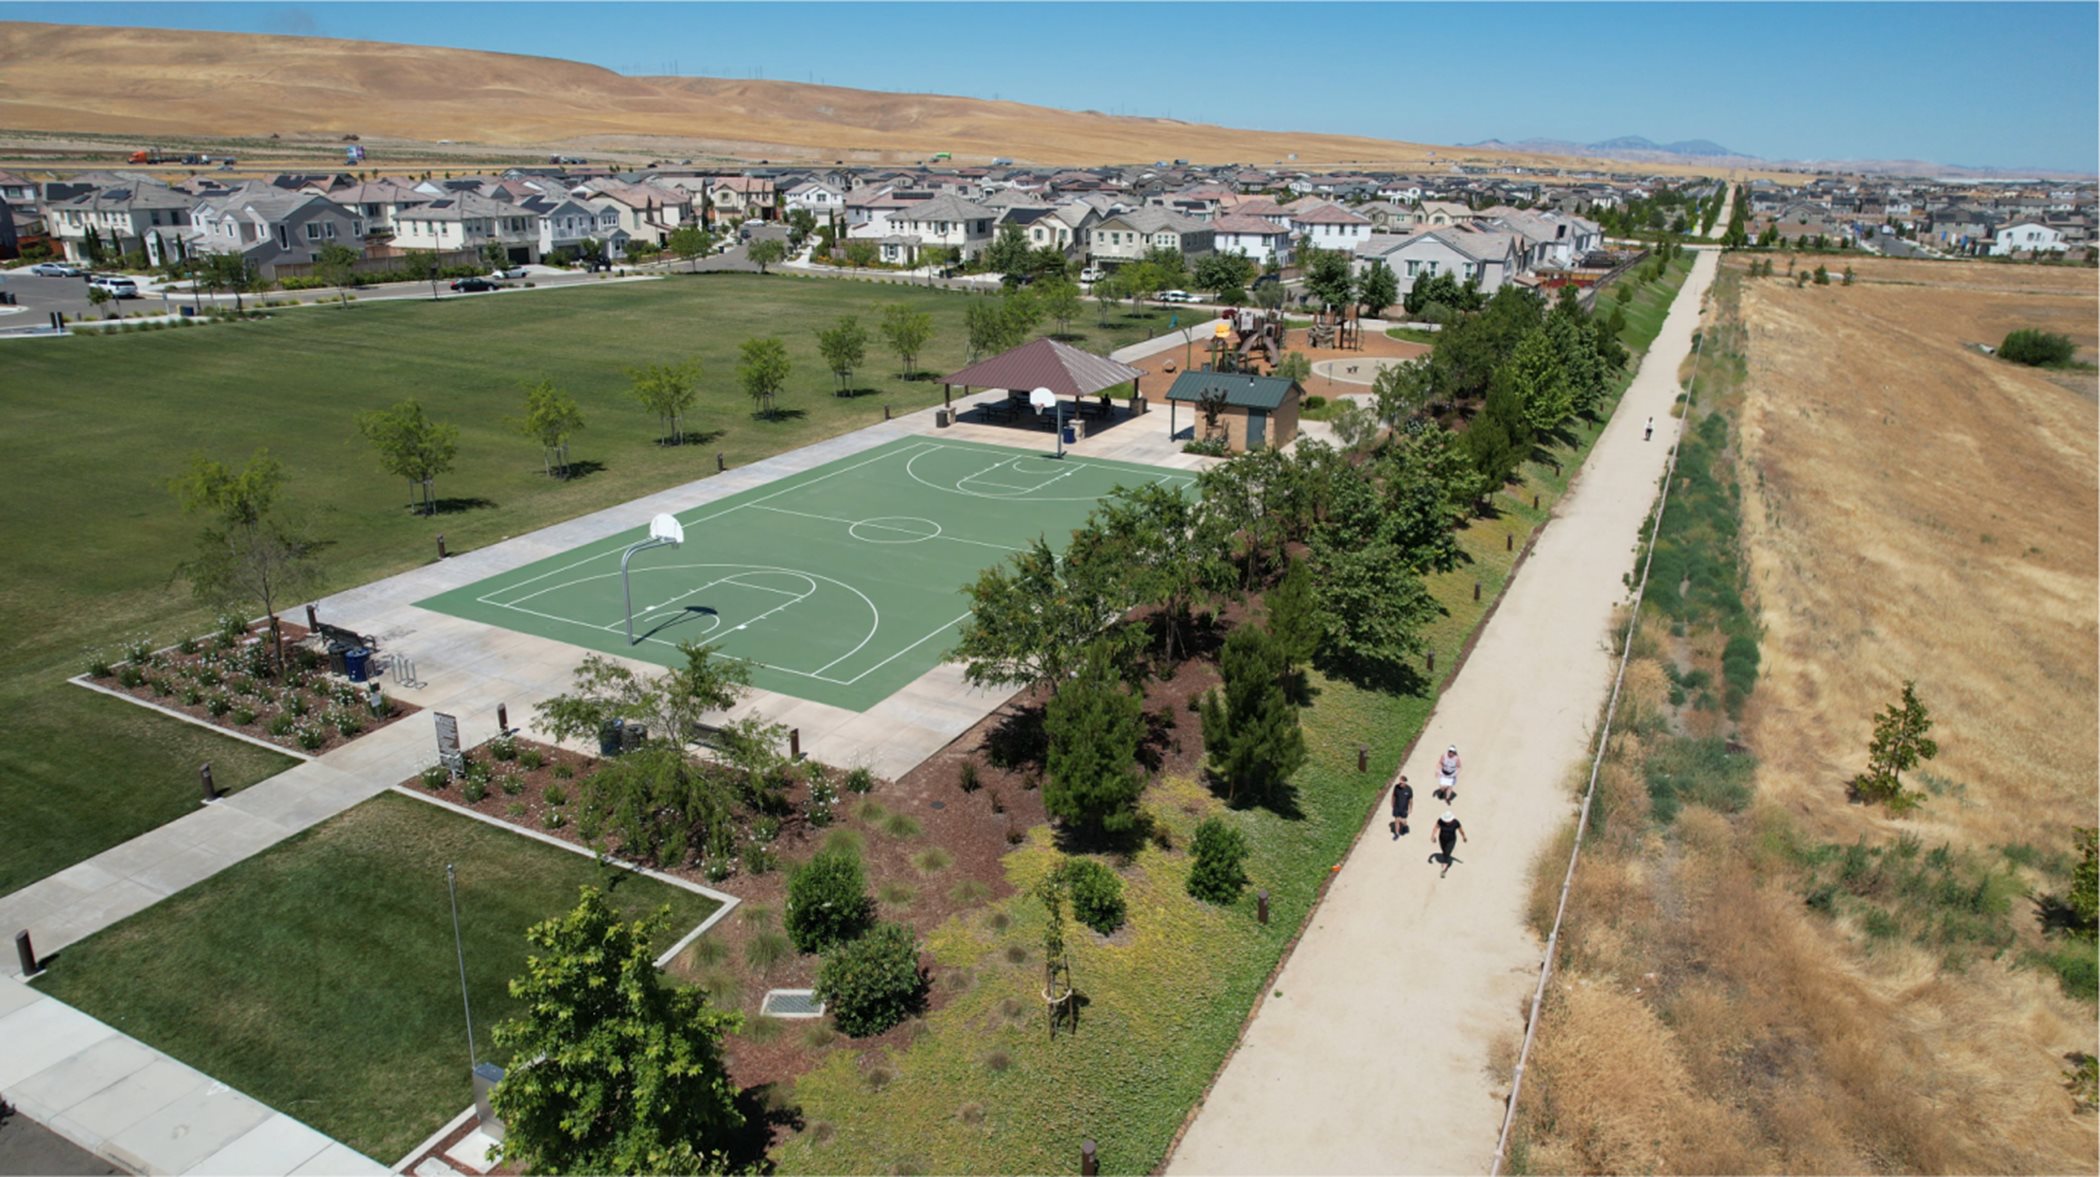 Tracy Hills Basketball Court